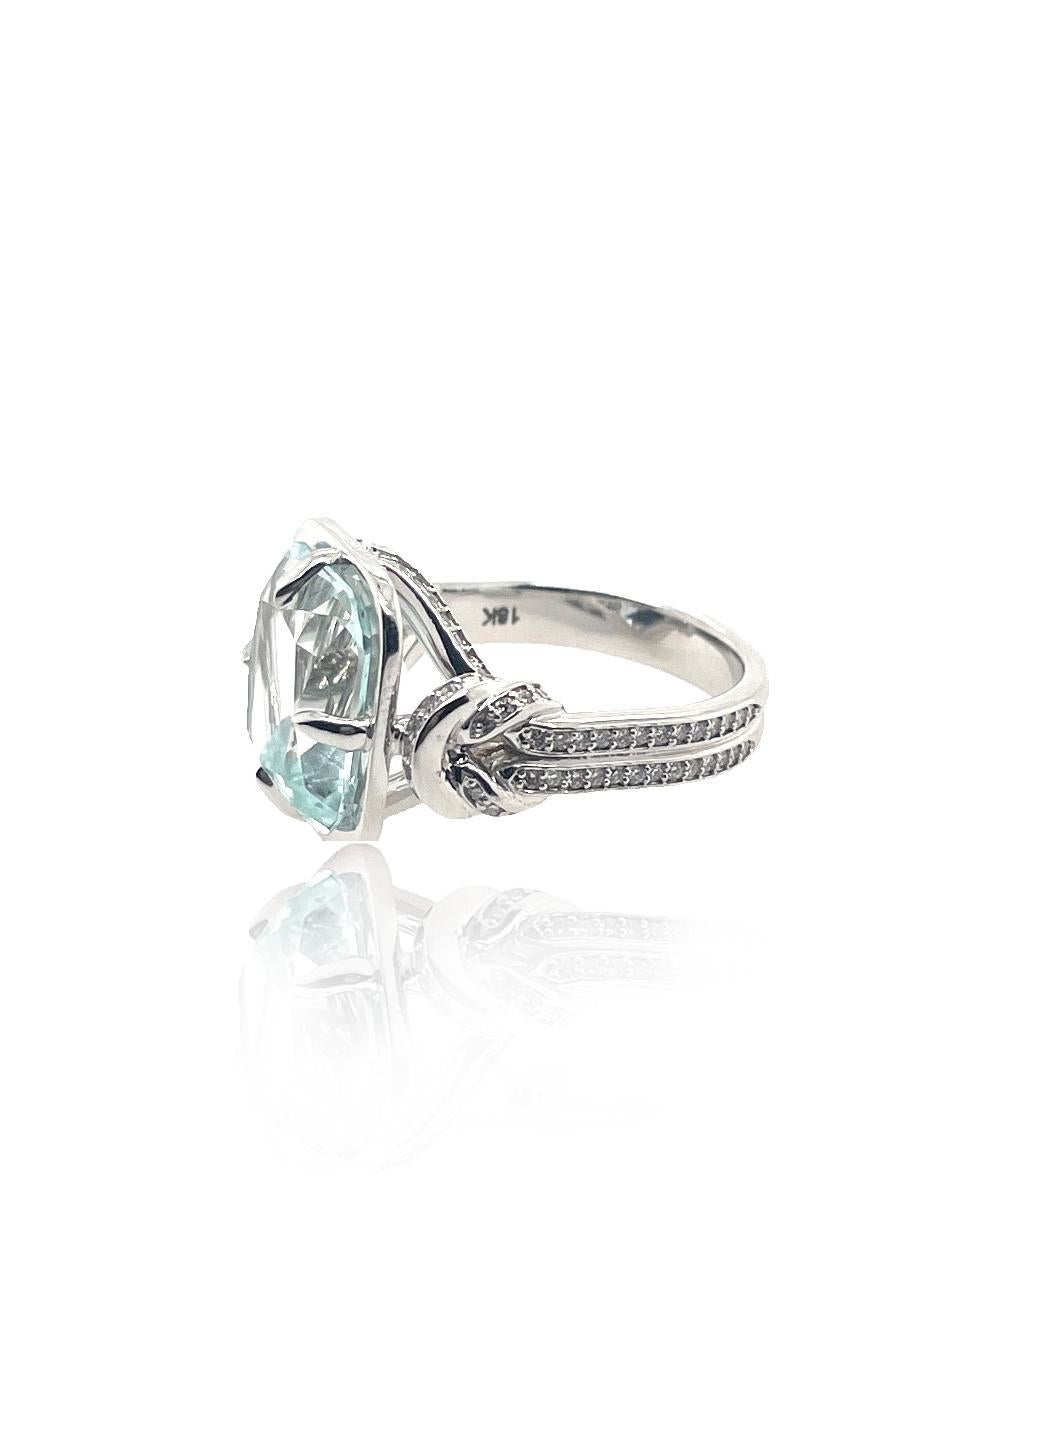 For Sale:  6ct Cushion Cut Aquamarine and Diamond Reef Knot Ring 4